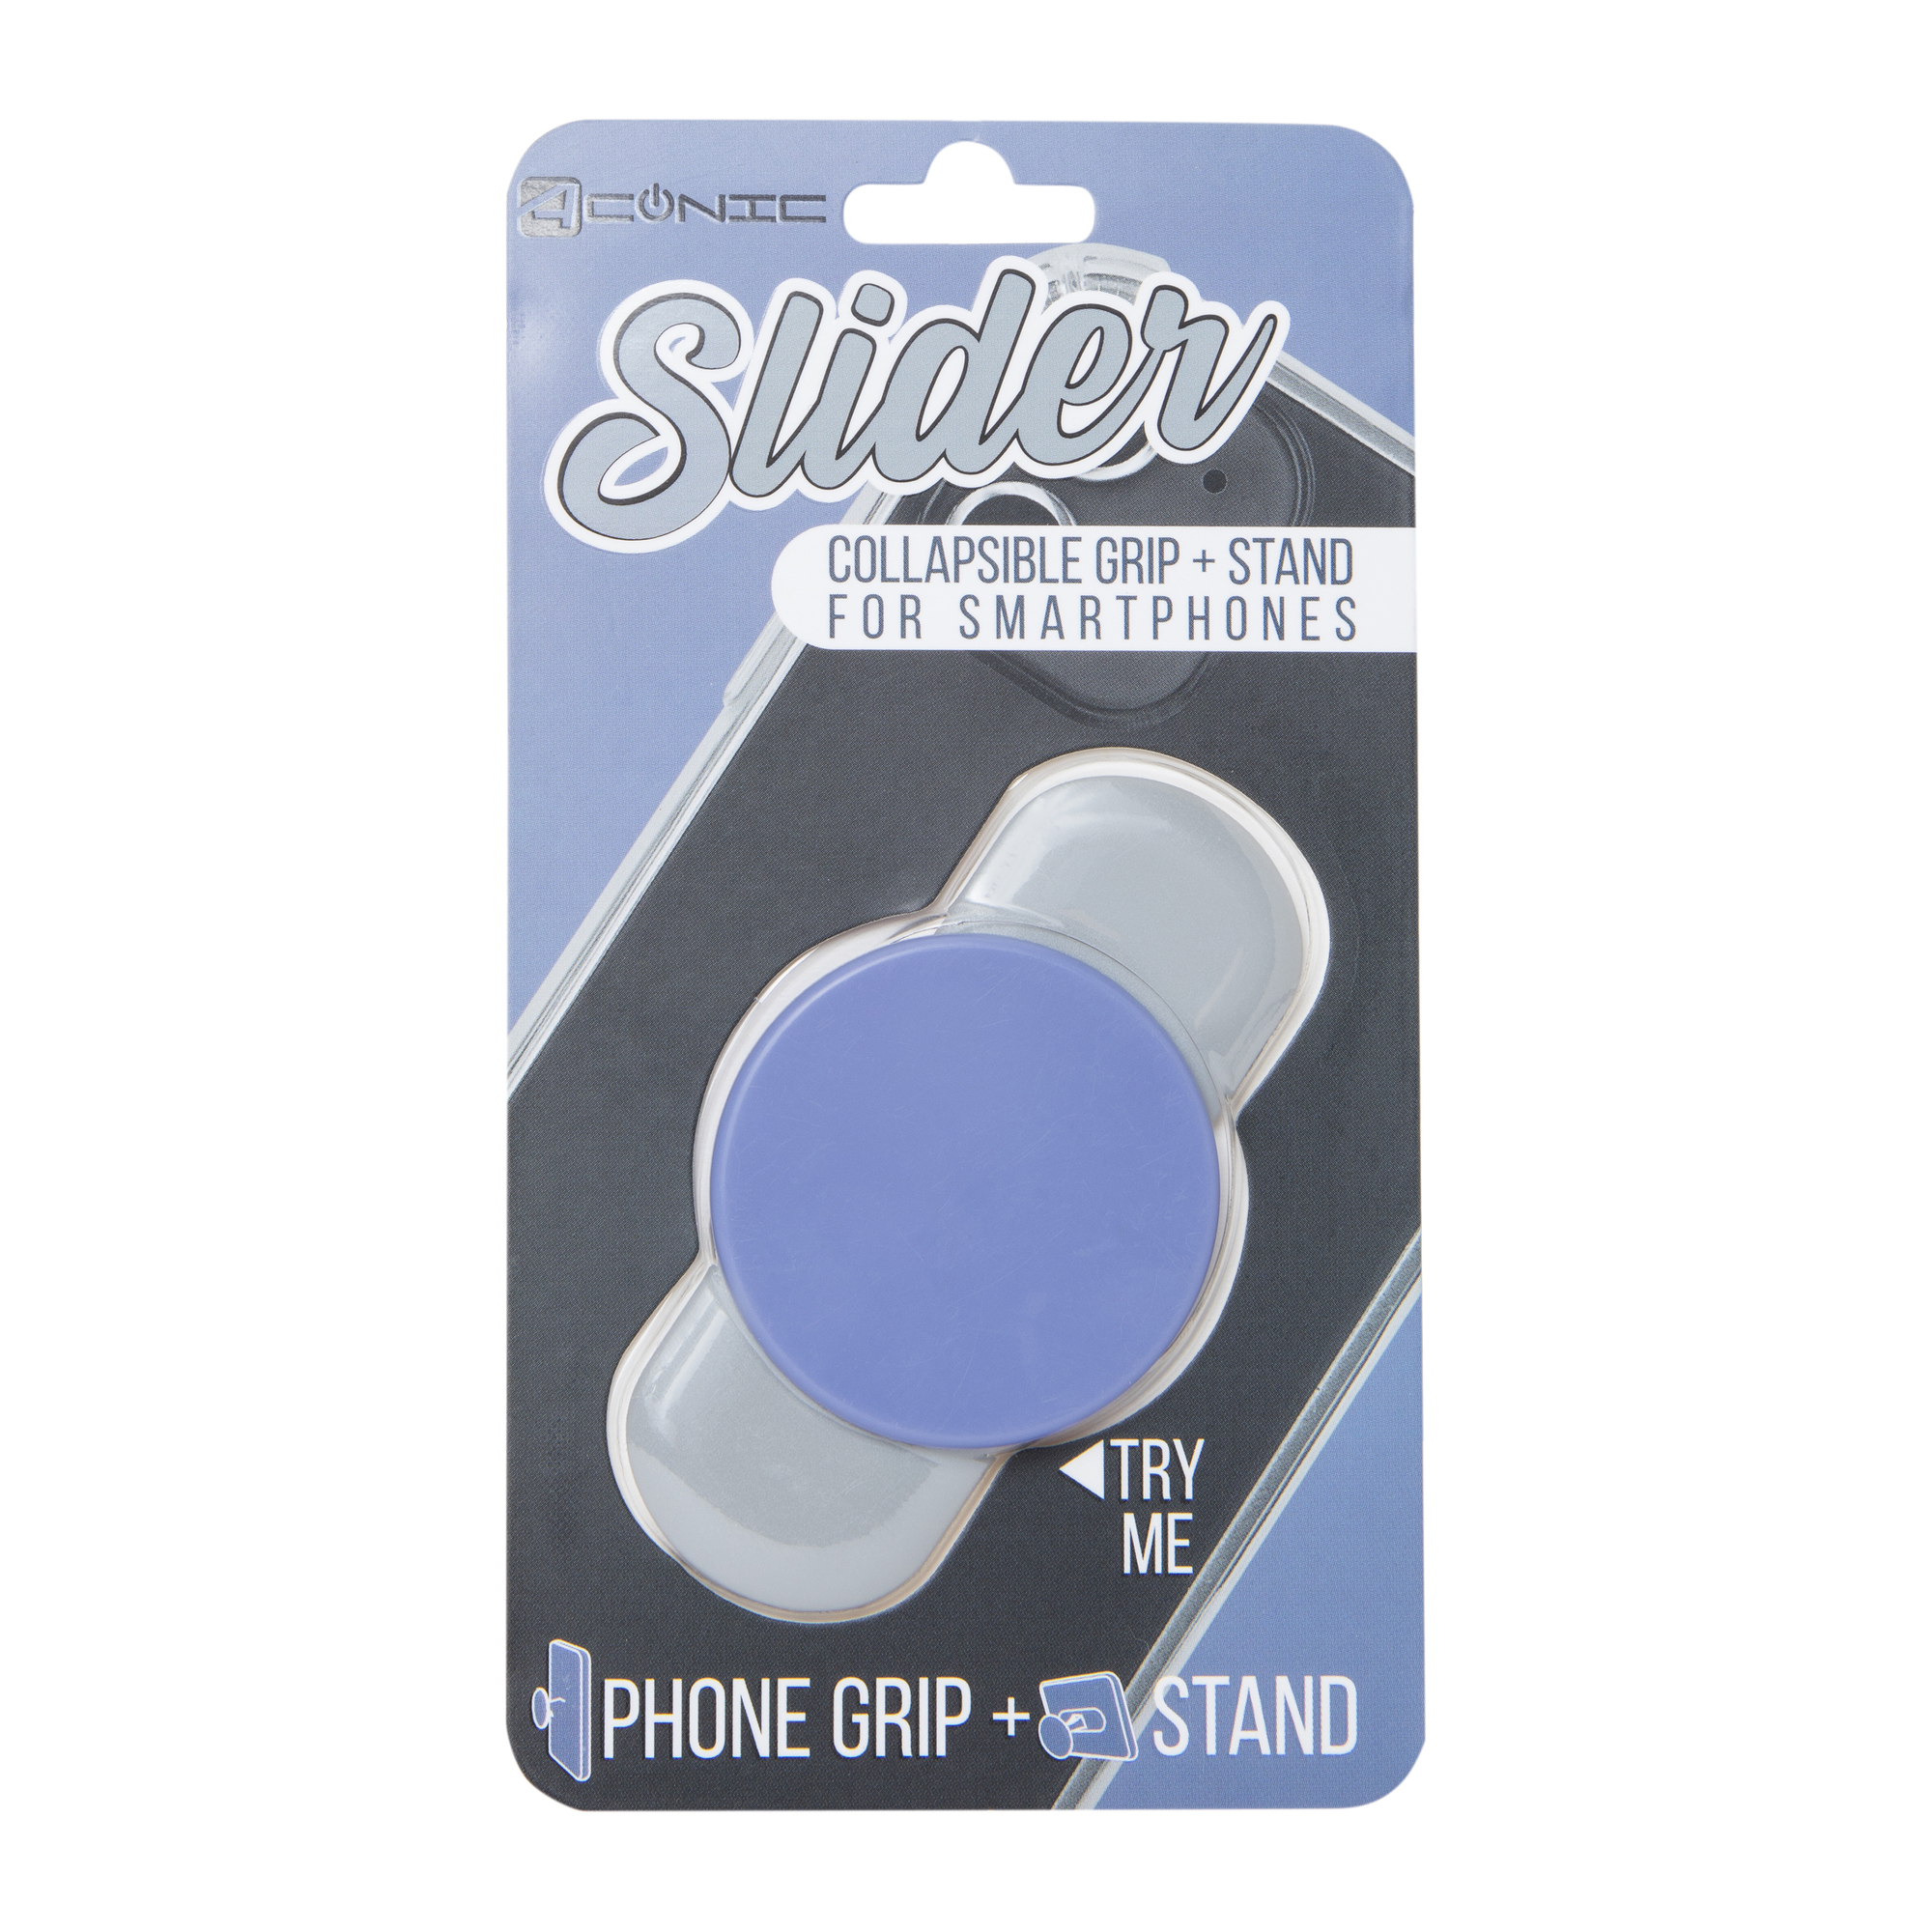 slider collapsible grip & stand for smartphones